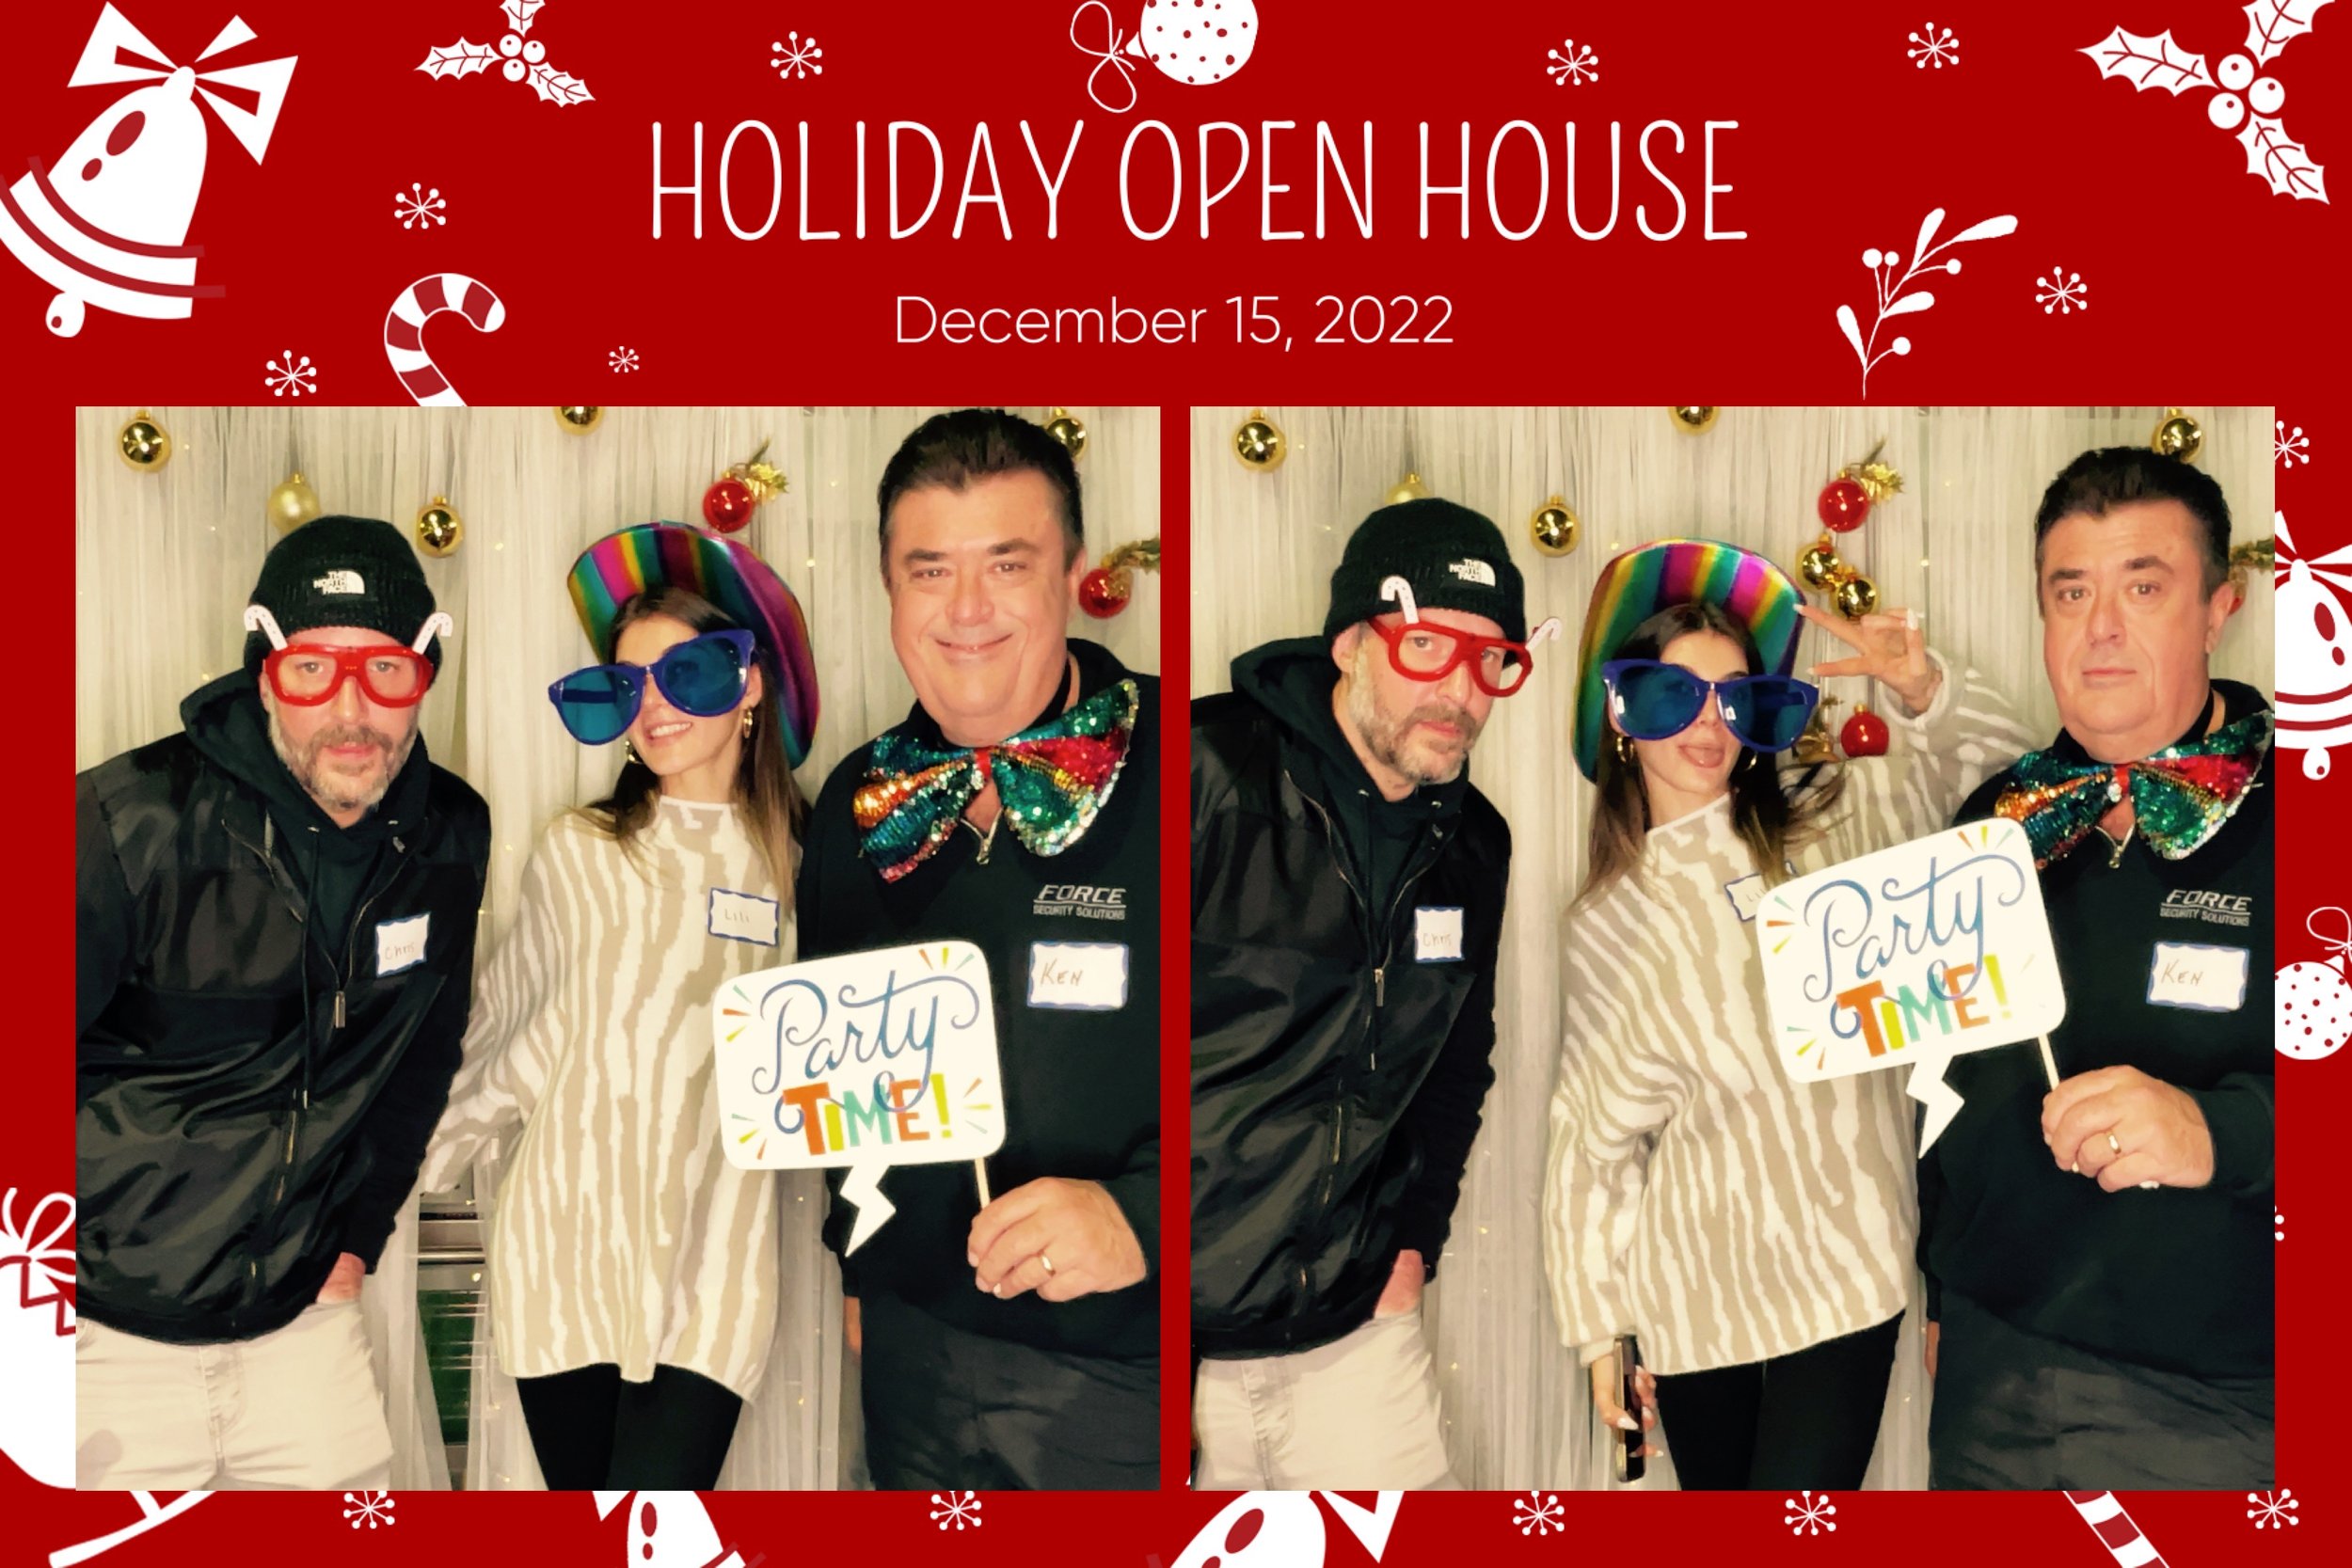 Prince William Chamber Holiday Open House 1.jpg